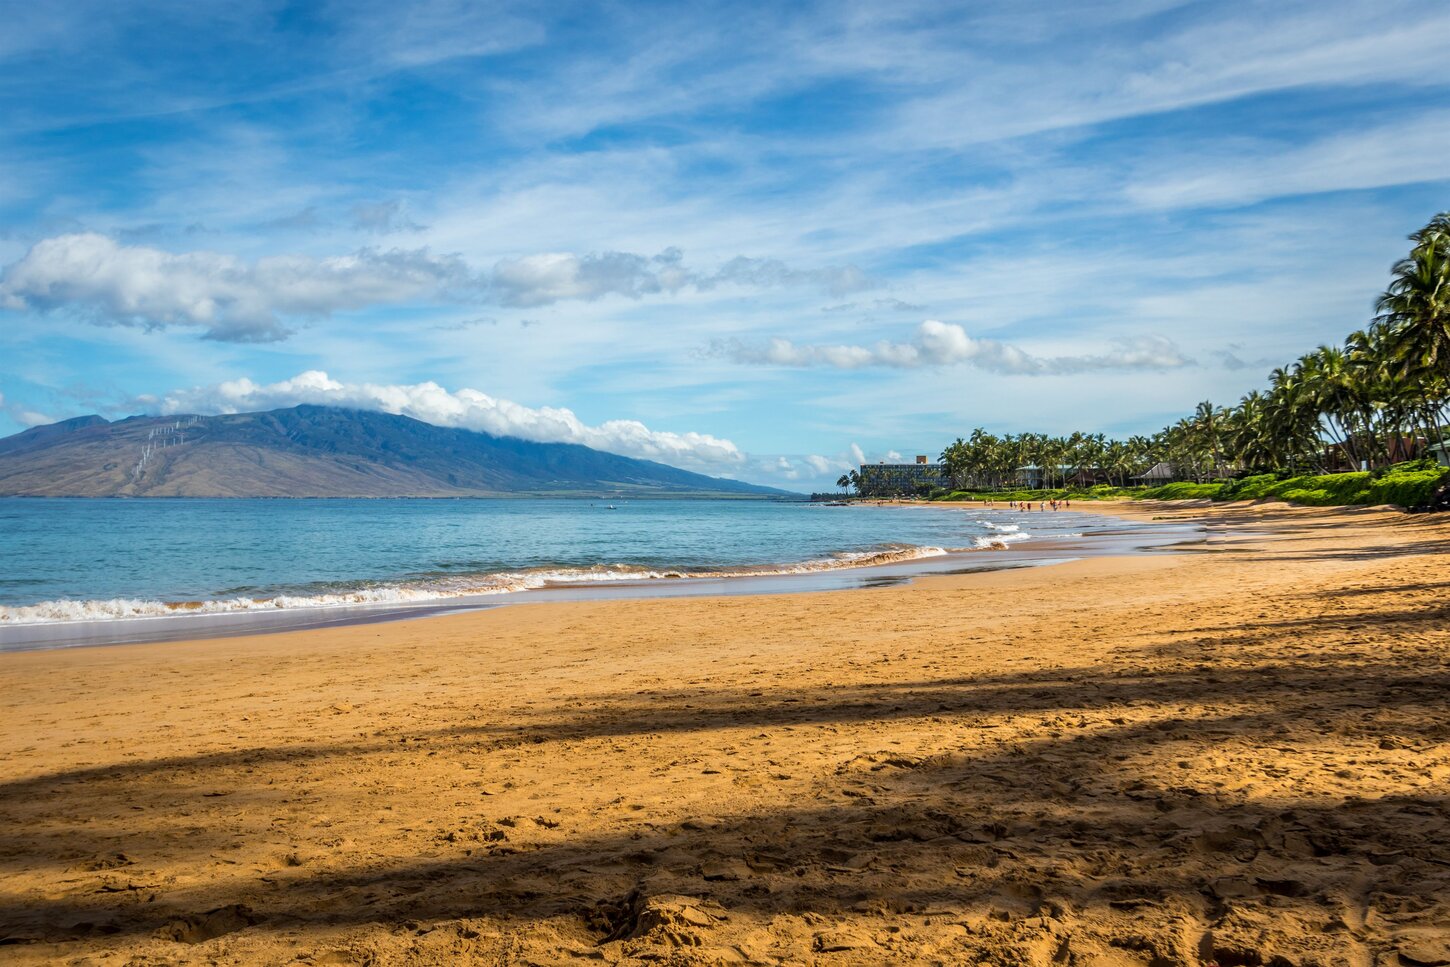 One of the biggest beaches on the South Side, our beach is perfect for runs, long morning walks, snorkeling, boogie boarding, and just relaxing! :)